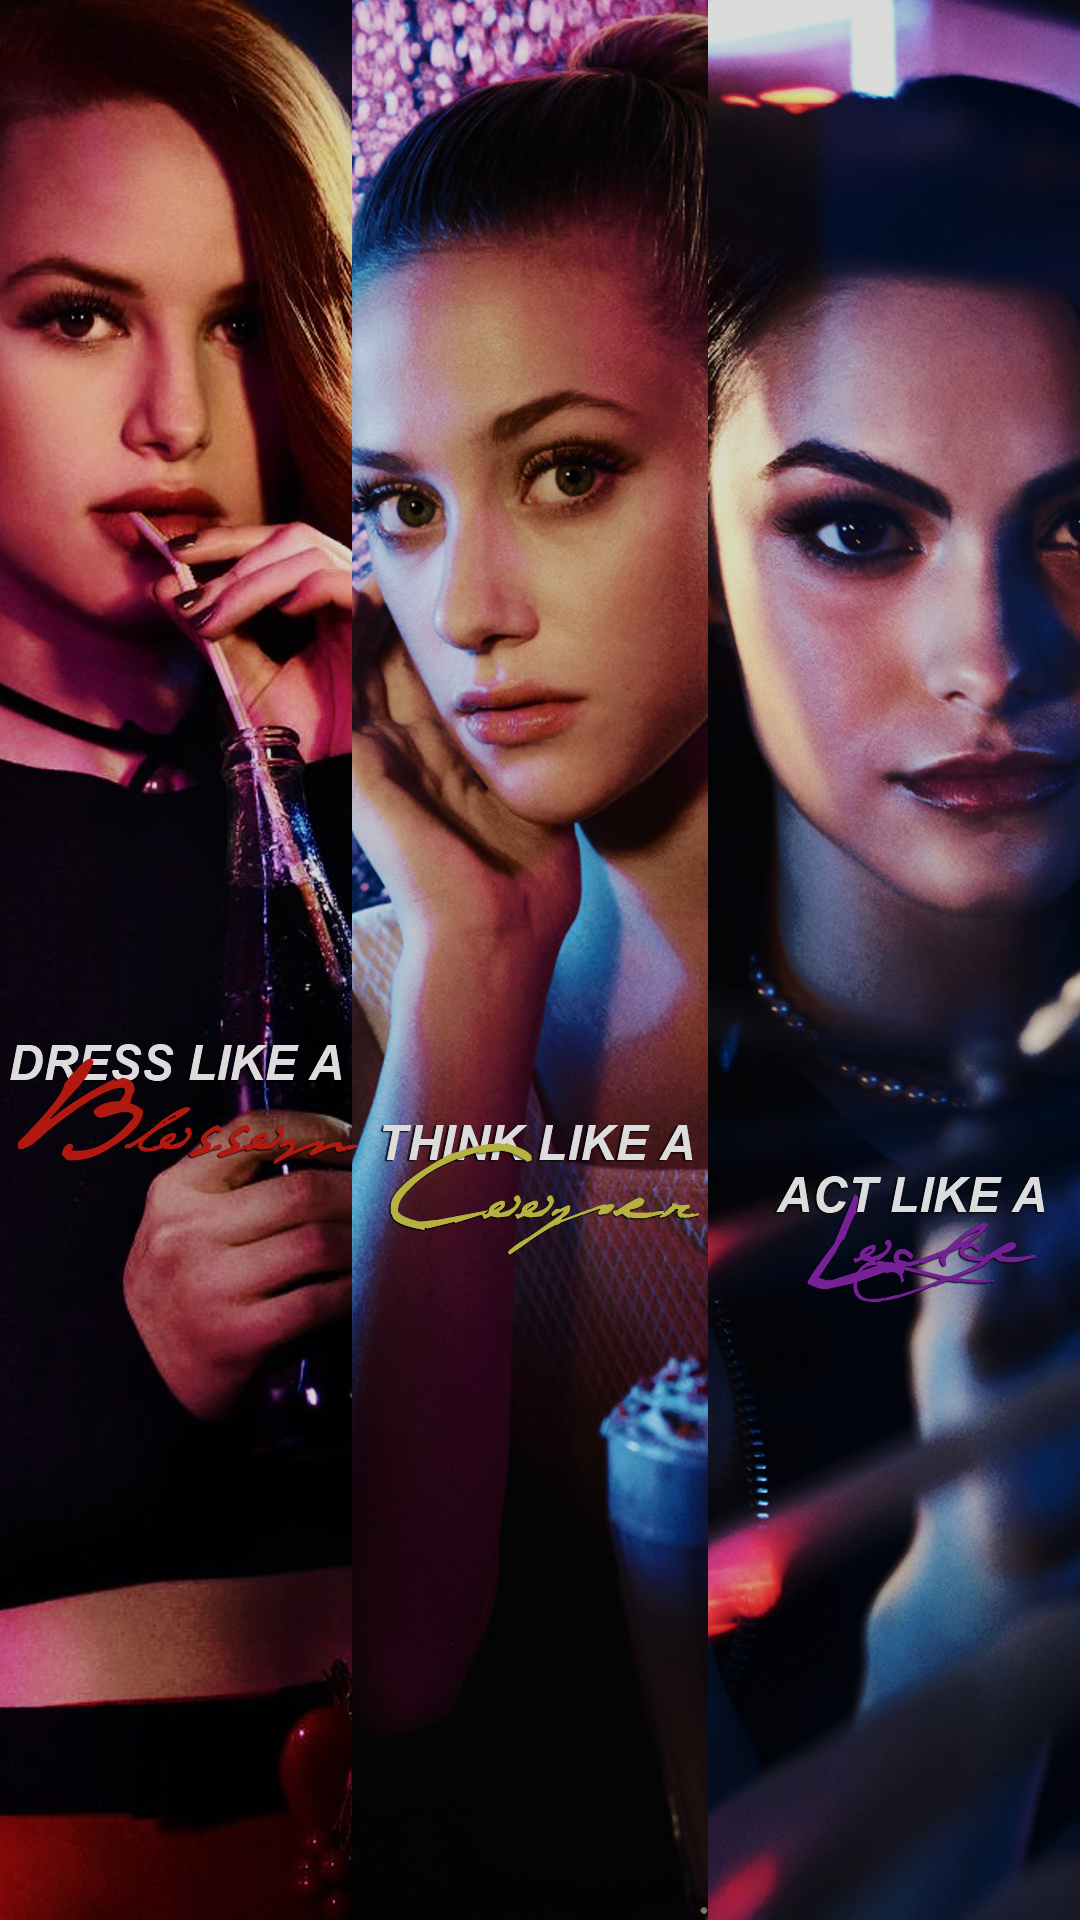 Best 5 Riverdale Wallpaper HD For Your Android or iPhone Wallpaper #android #iphone #wallpaper. Riverdale wallpaper iphone, Riverdale aesthetic, Riverdale funny